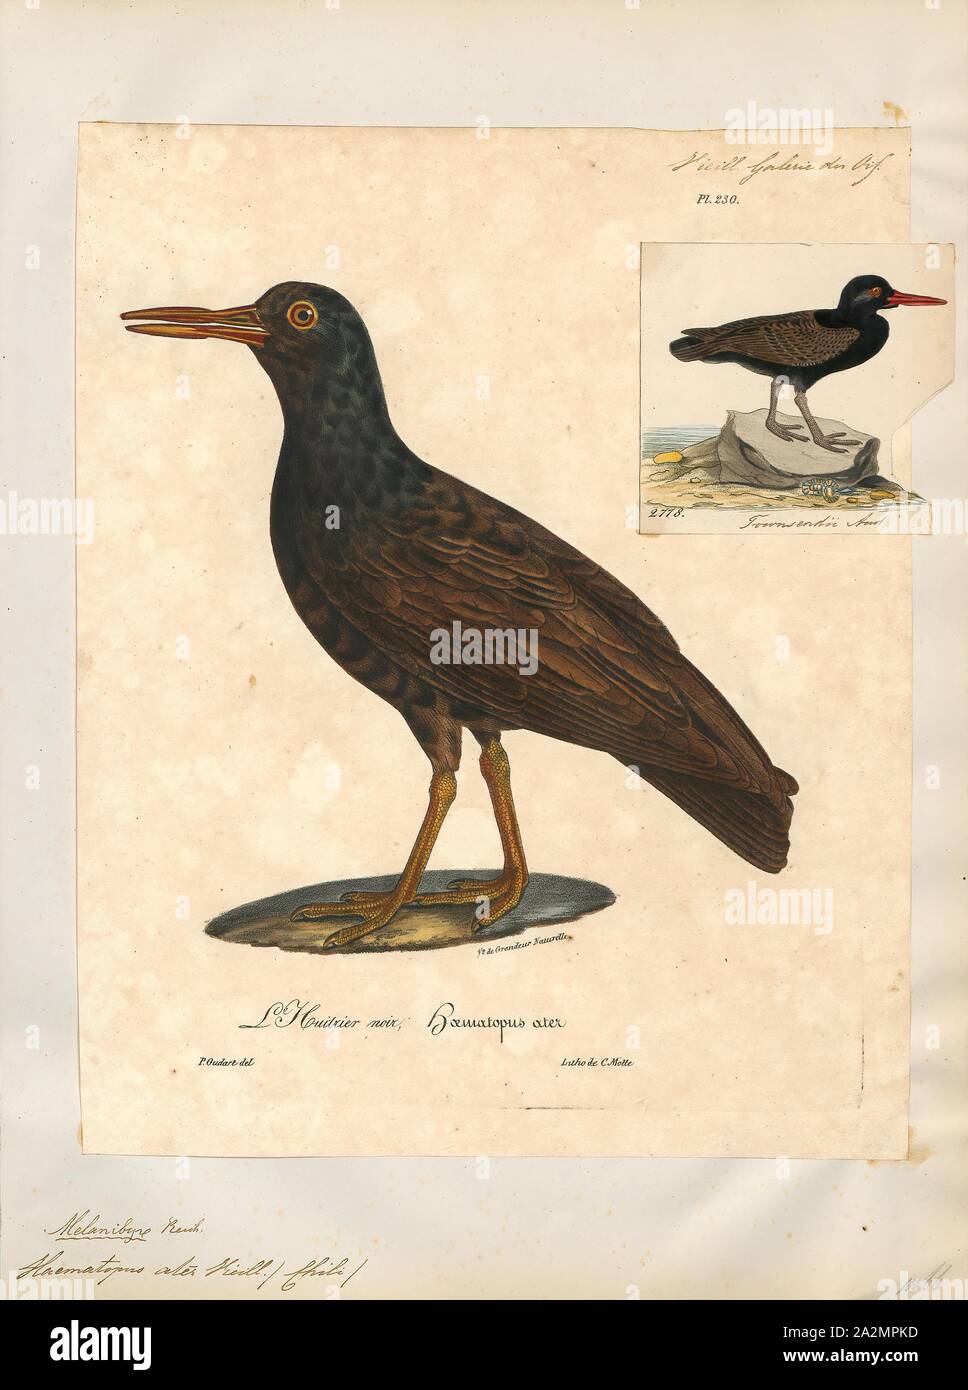 Haematopus ater, Print, The blackish oystercatcher (Haematopus ater) is a species of wading bird in the oystercatcher family Haematopodidae. It is found in Argentina, Chile, the Falkland Islands and Peru, and is a vagrant to Uruguay. The population is estimated at 15, 000-80, 000., 1825-1834 Stock Photo